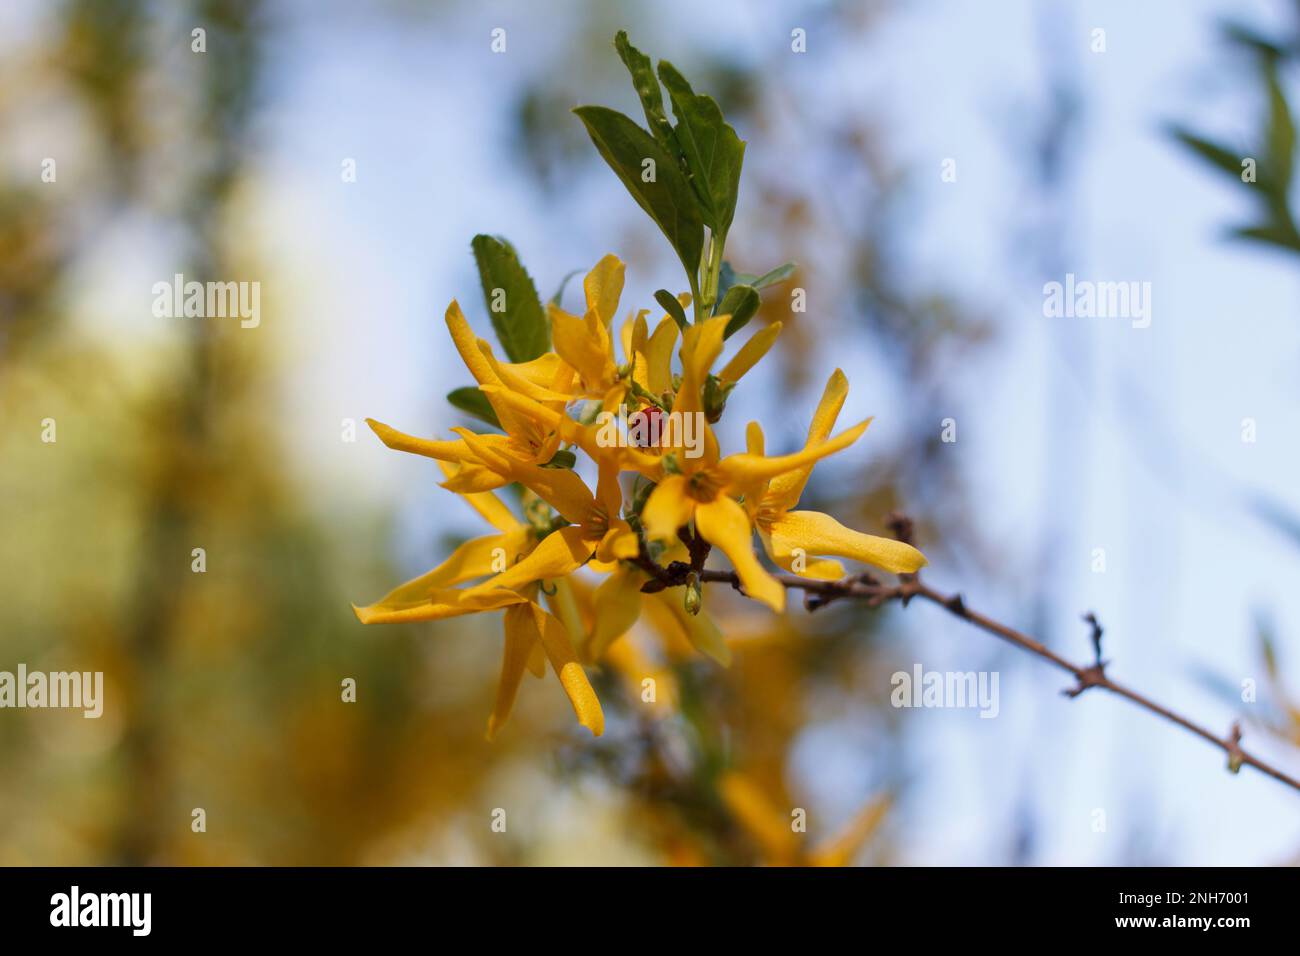 Forsiphy shrub tree beautifully flowering in yellow with an insect, ladybug in the spring park Stock Photo